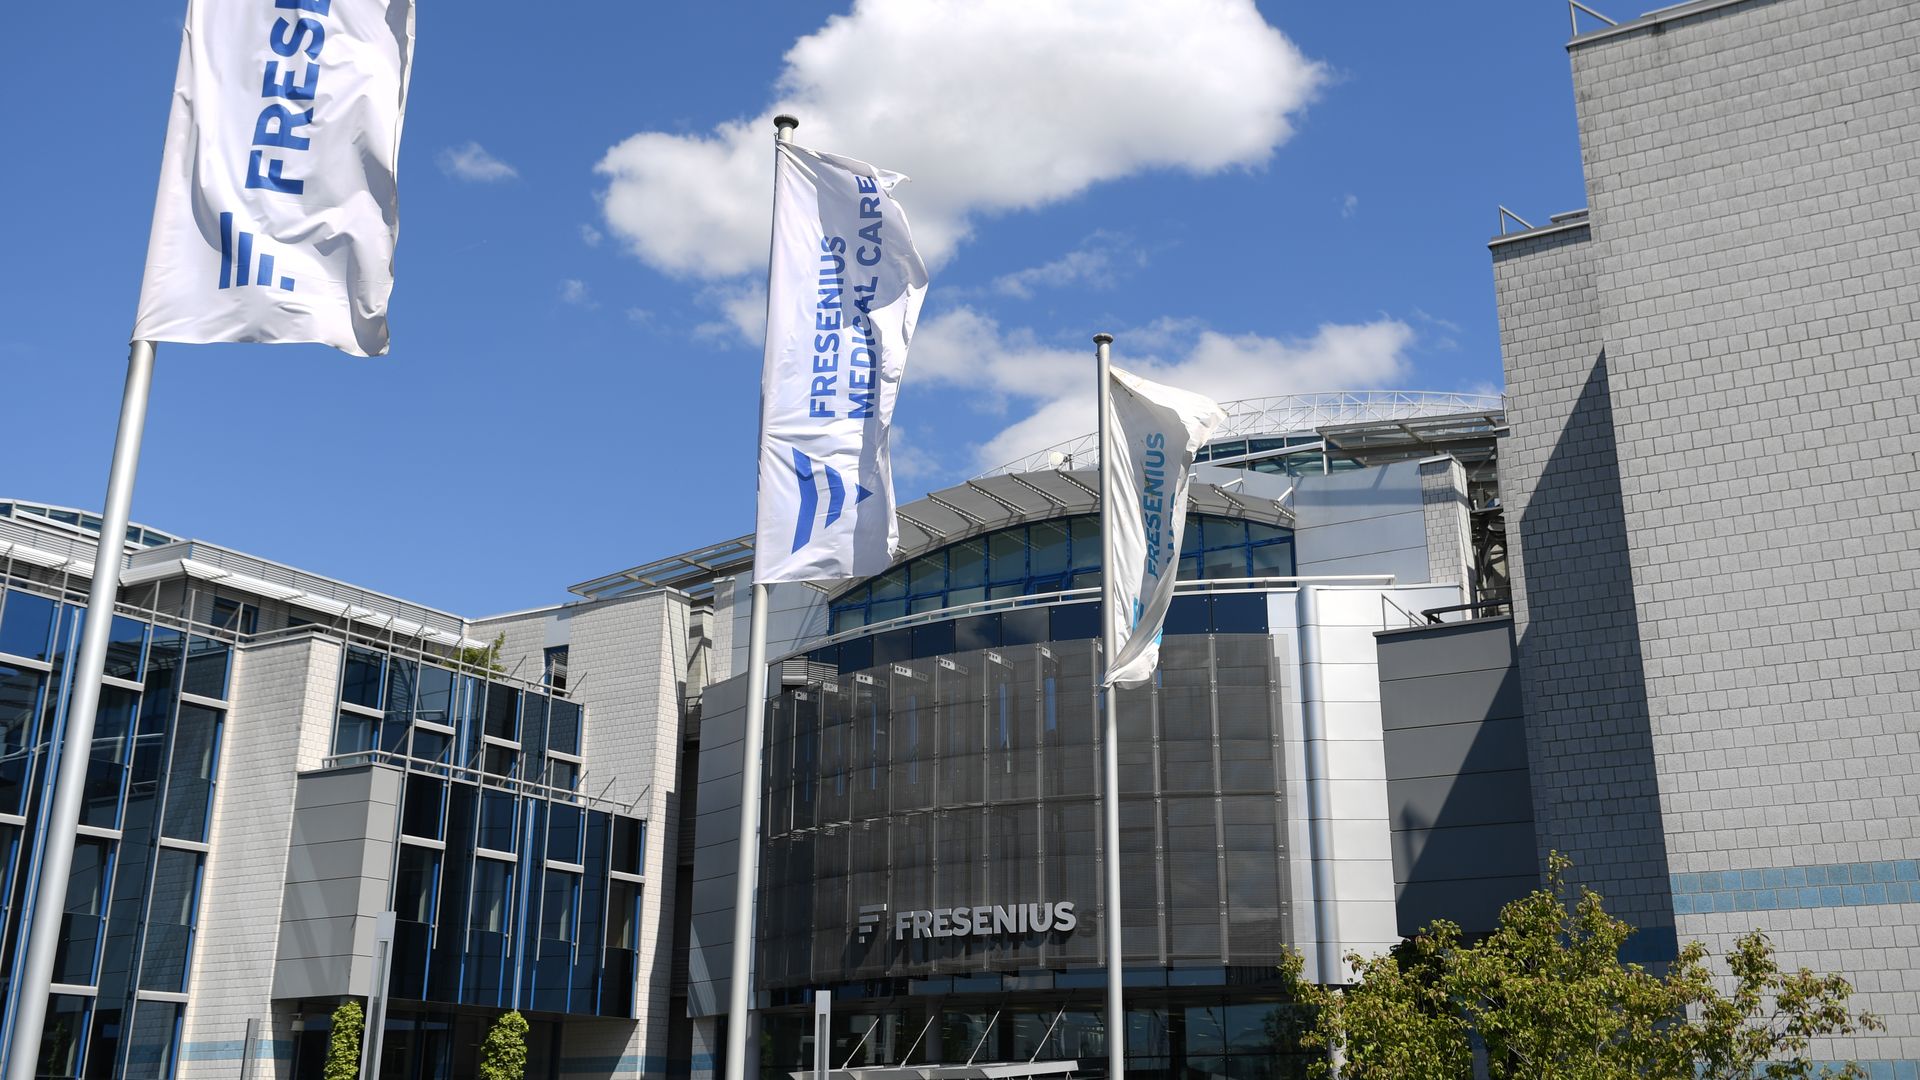 Fresenius flags fly in front of the Fresenius headquarters building.